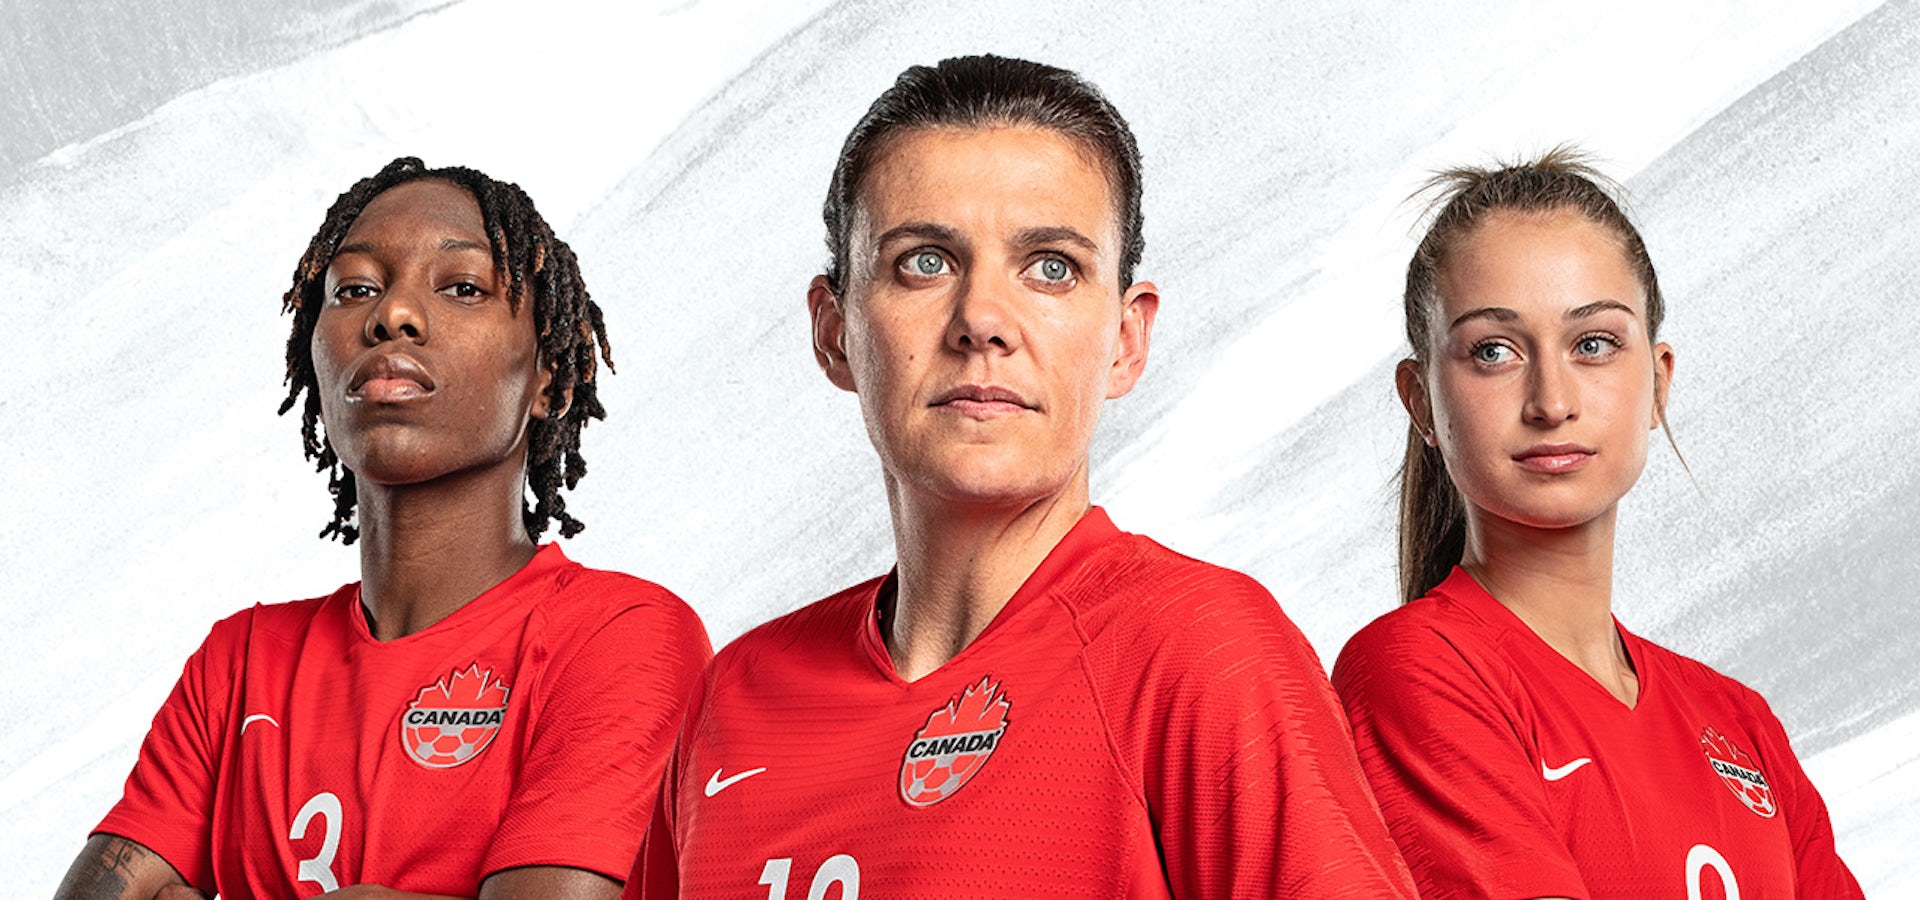 CTV and TSN Announce FIFA WOMEN’S WORLD CUP FRANCE 2019™ Broadcast Schedule, Featuring Exclusive